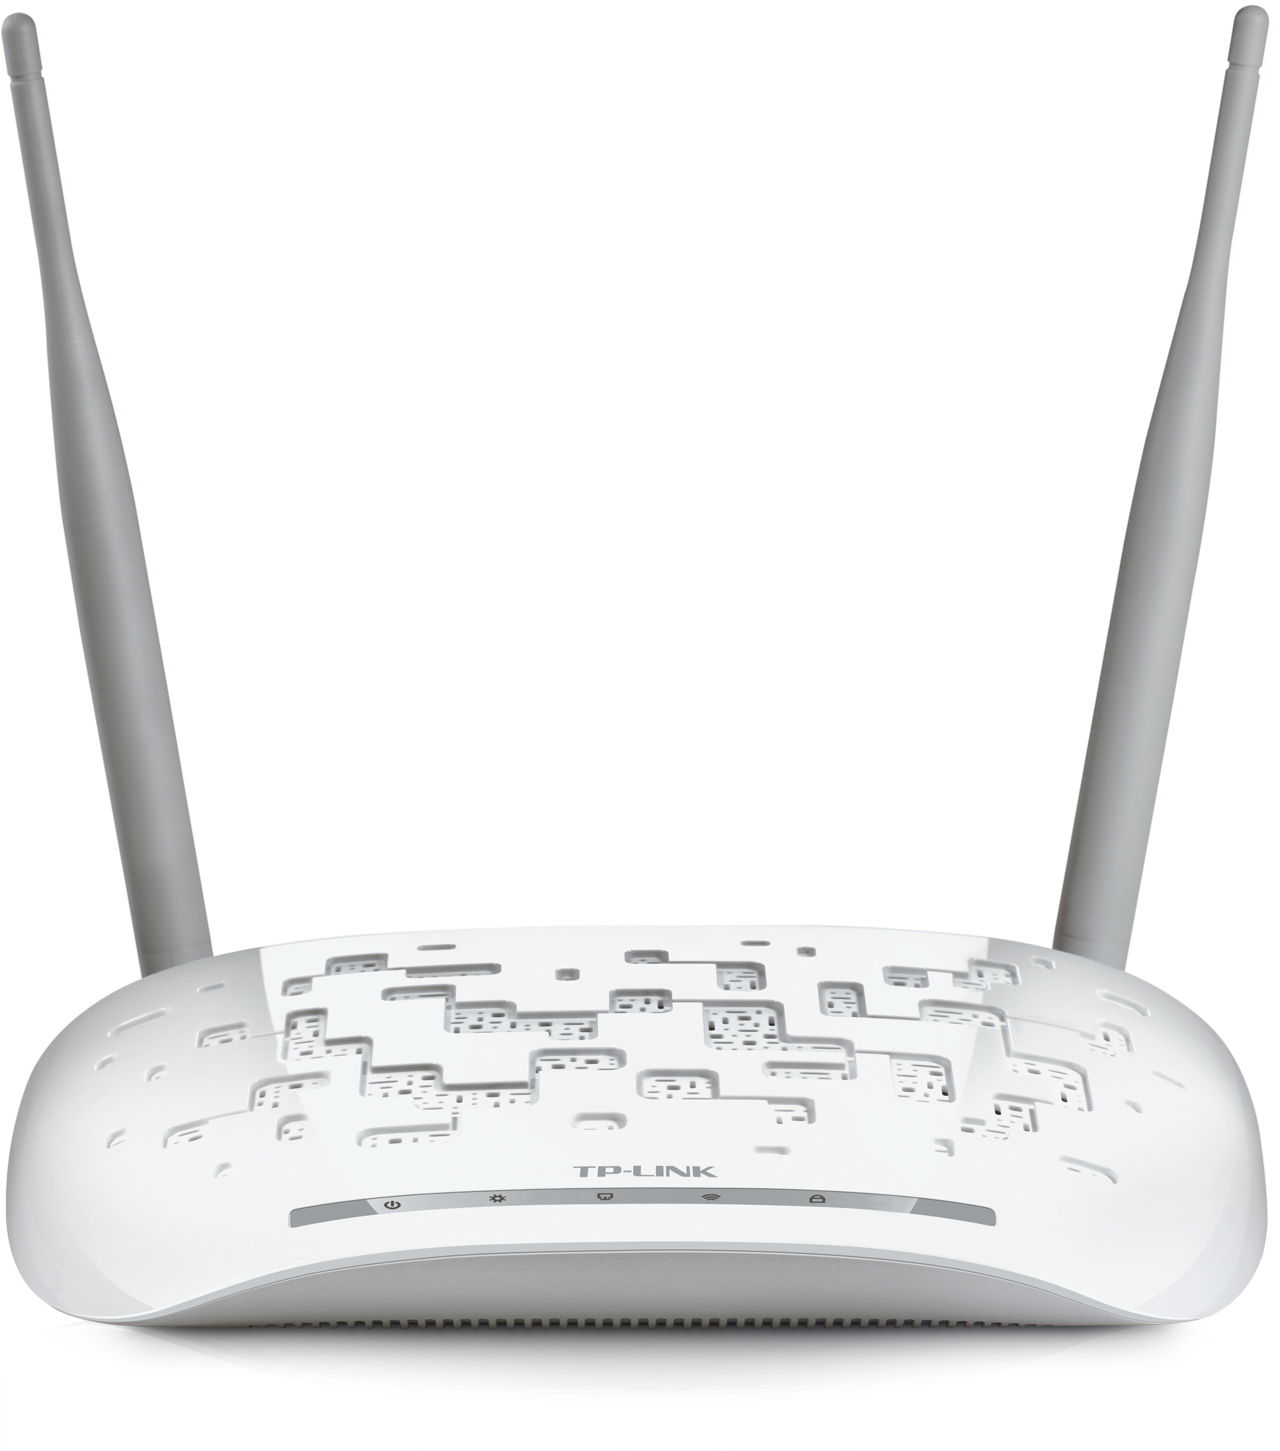 Hard reset TP-LINK TL-WA9ND - How to Hard Reset Your Router